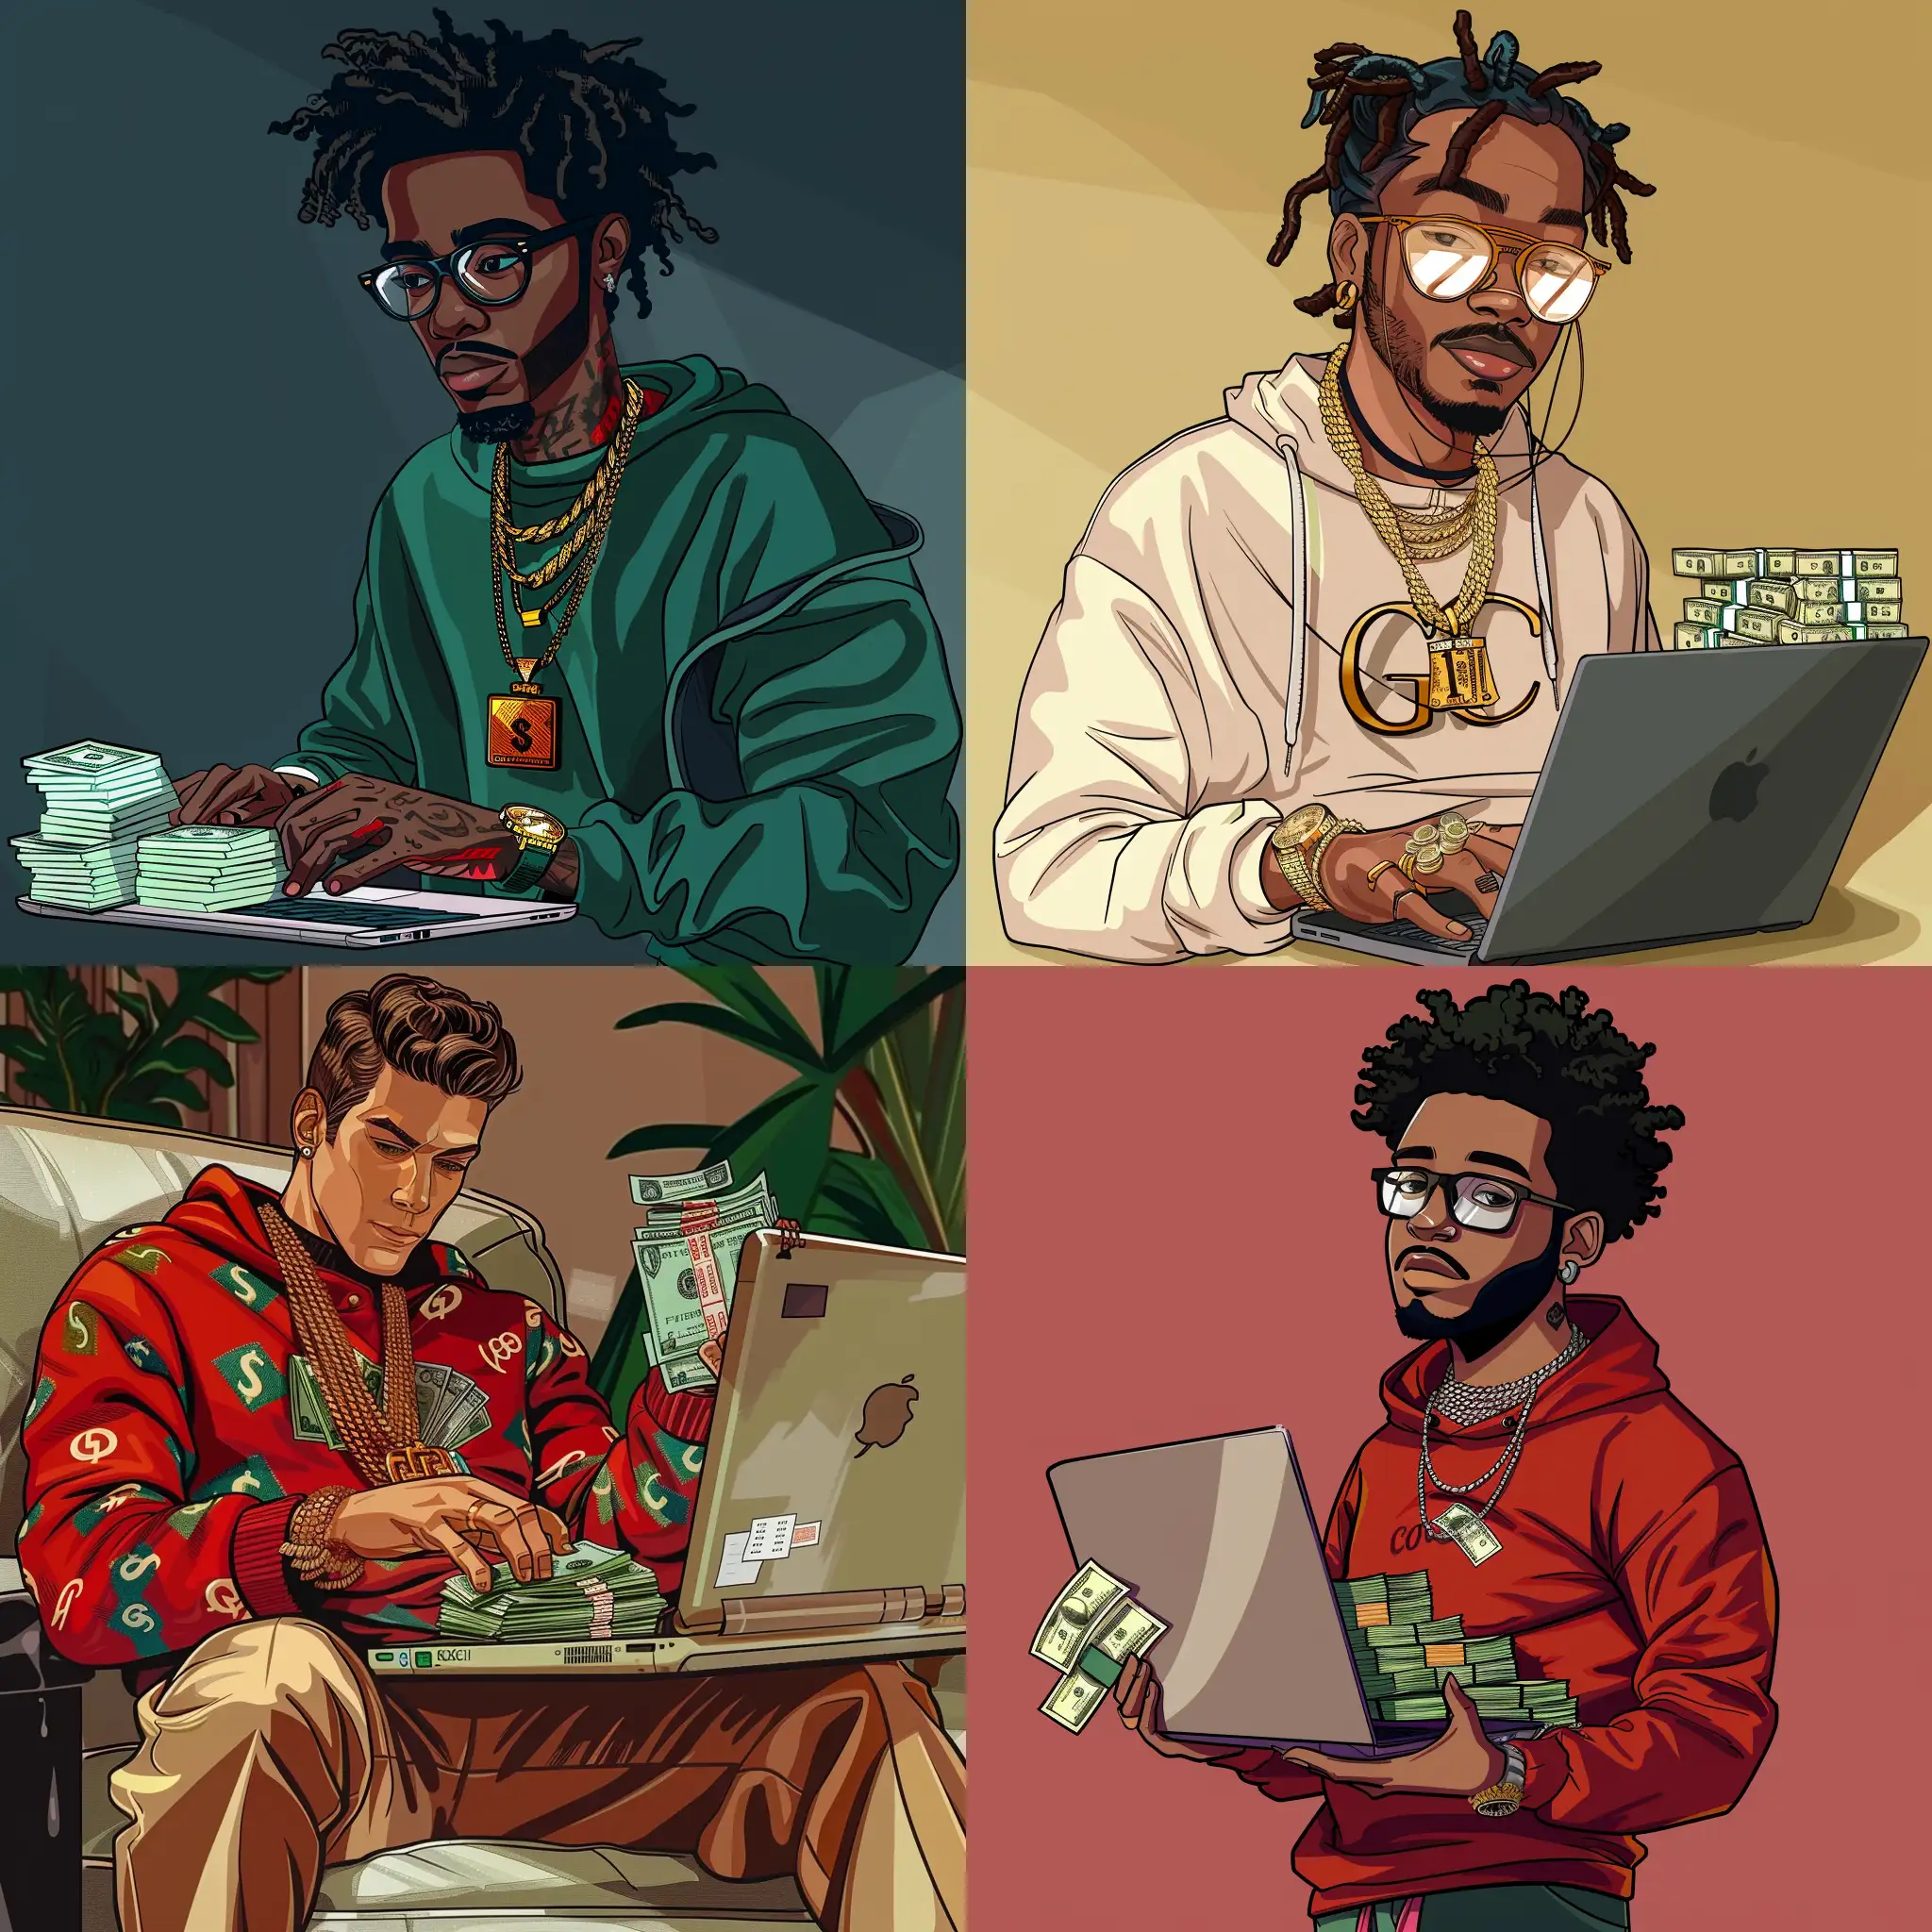 Riley-Freeman-Cartoon-Character-with-Gucci-Sweater-Money-and-Laptop